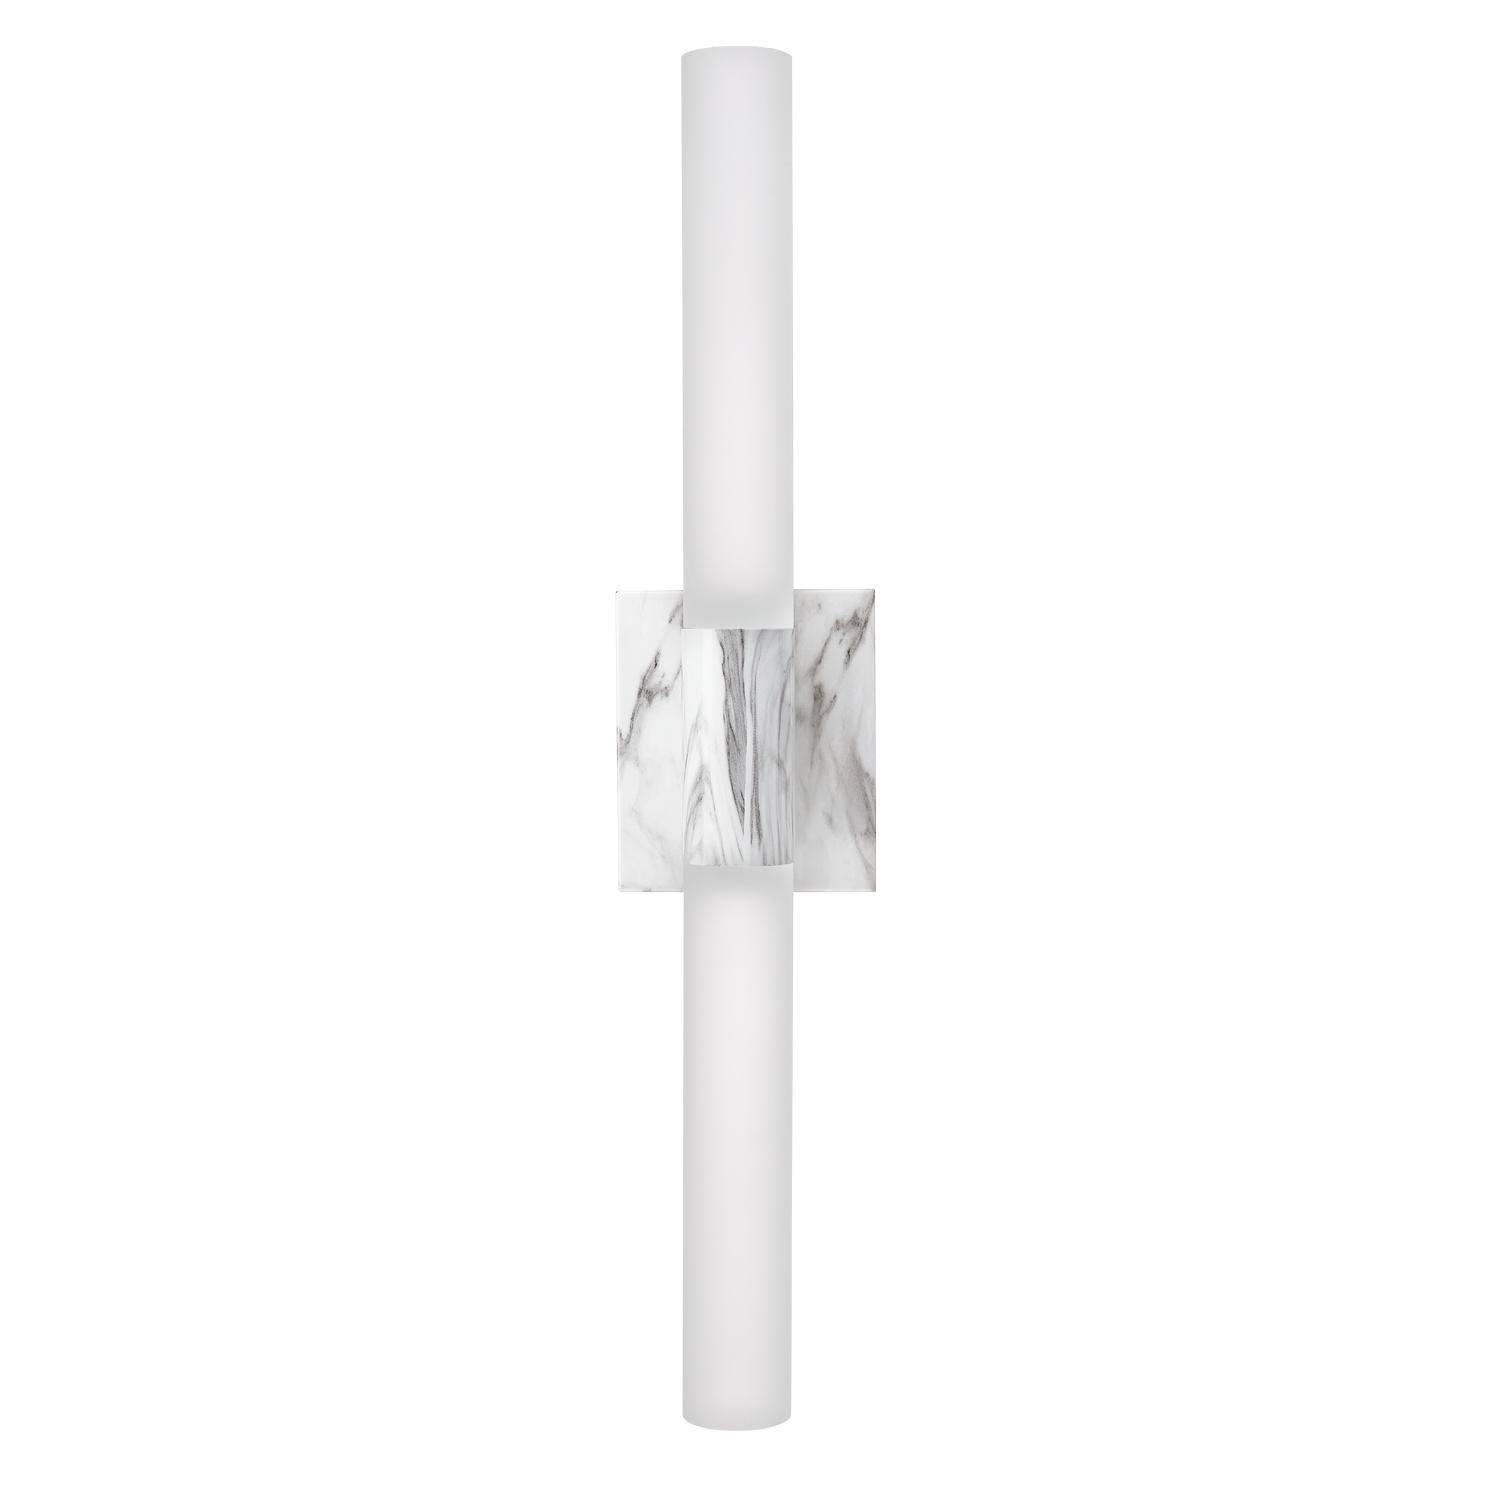 Globe Electric Edinburgh 2-Light White Faux Marble LED Integrated Dimmable Wall Sconce Vanity Light with Frosted Acrylic Shades， 91000660